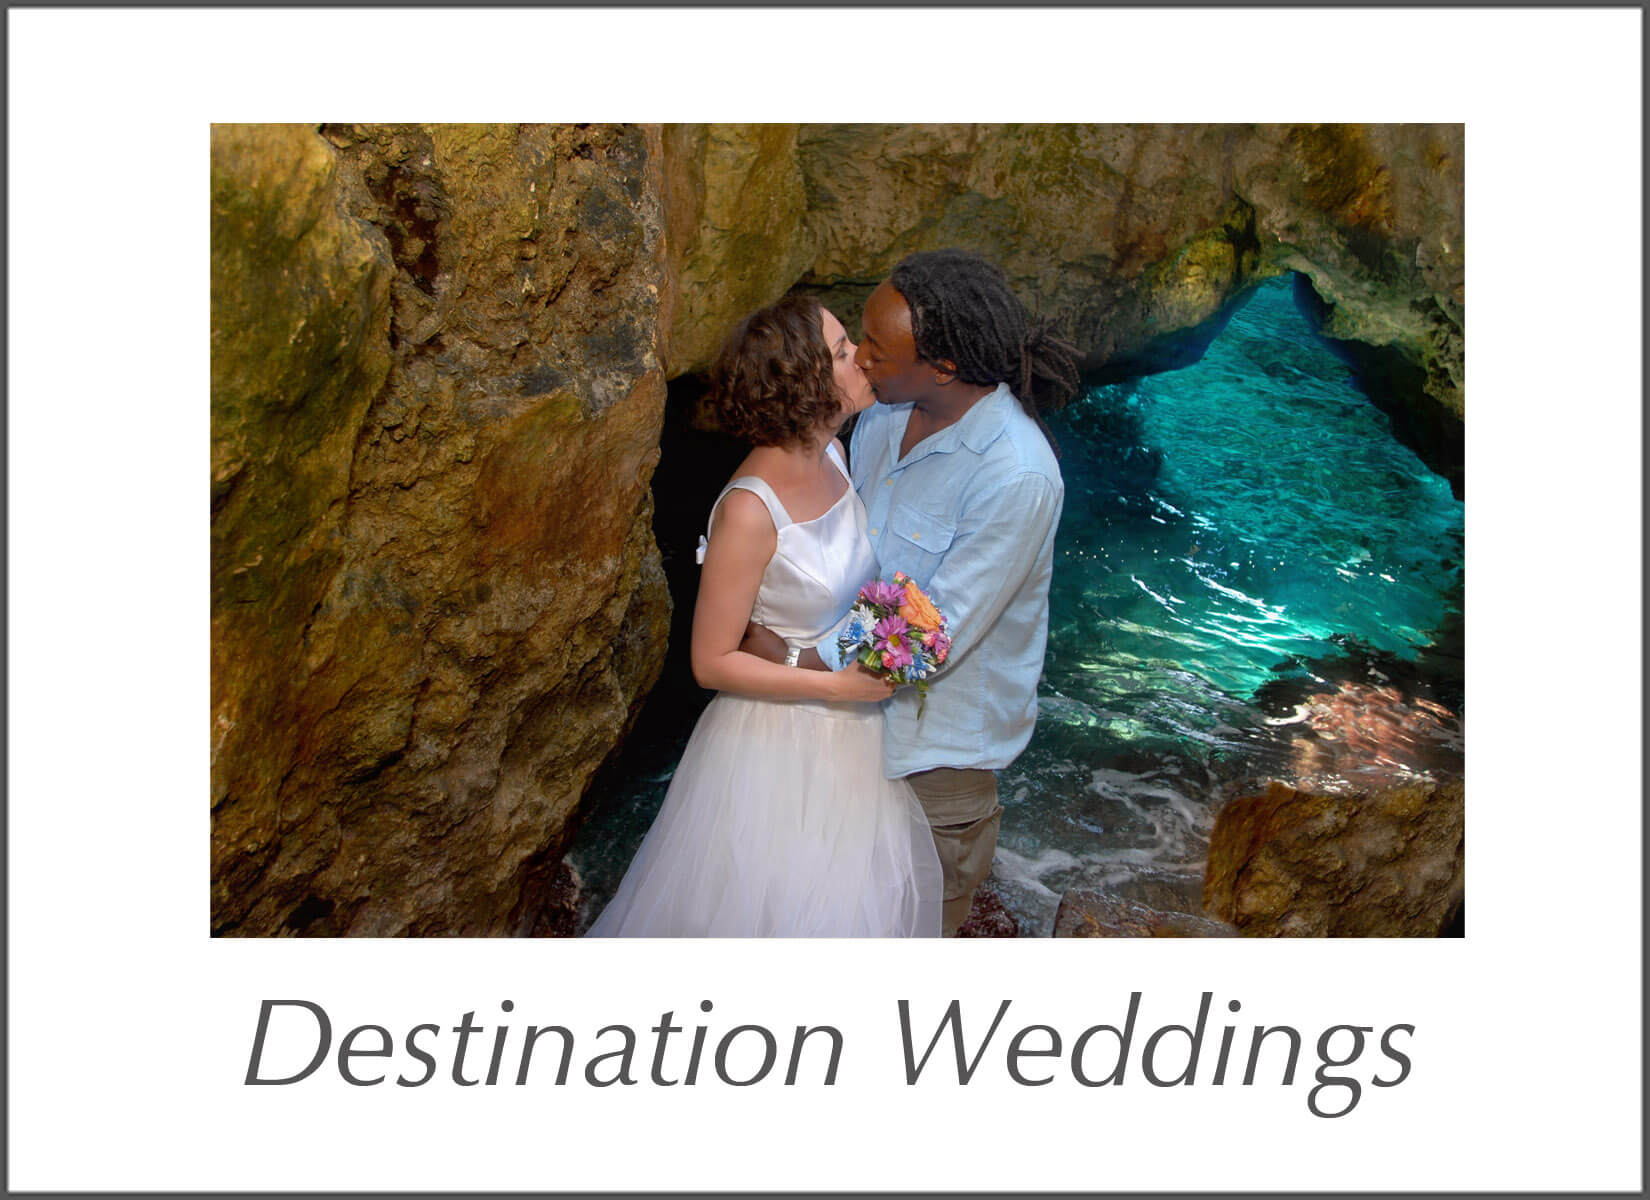 Well traveled photographer Marci Curtis is available to photograph destination weddings.